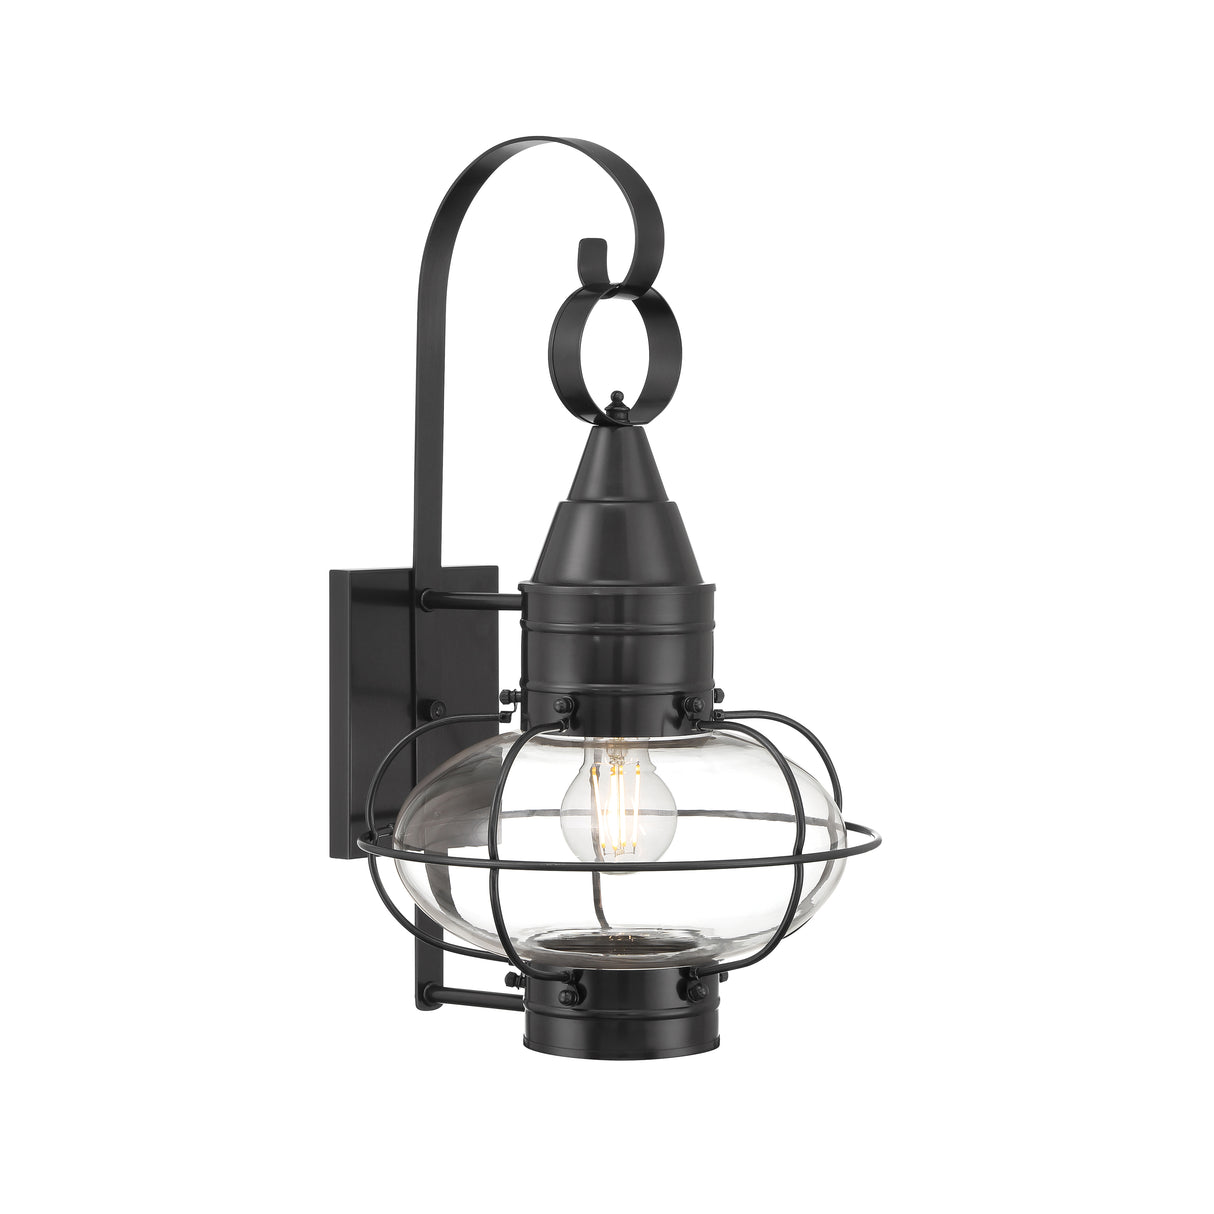 Elk 1512-GM-CL Classic Onion Outdoor Wall Light - Gun Metal with Clear Glass